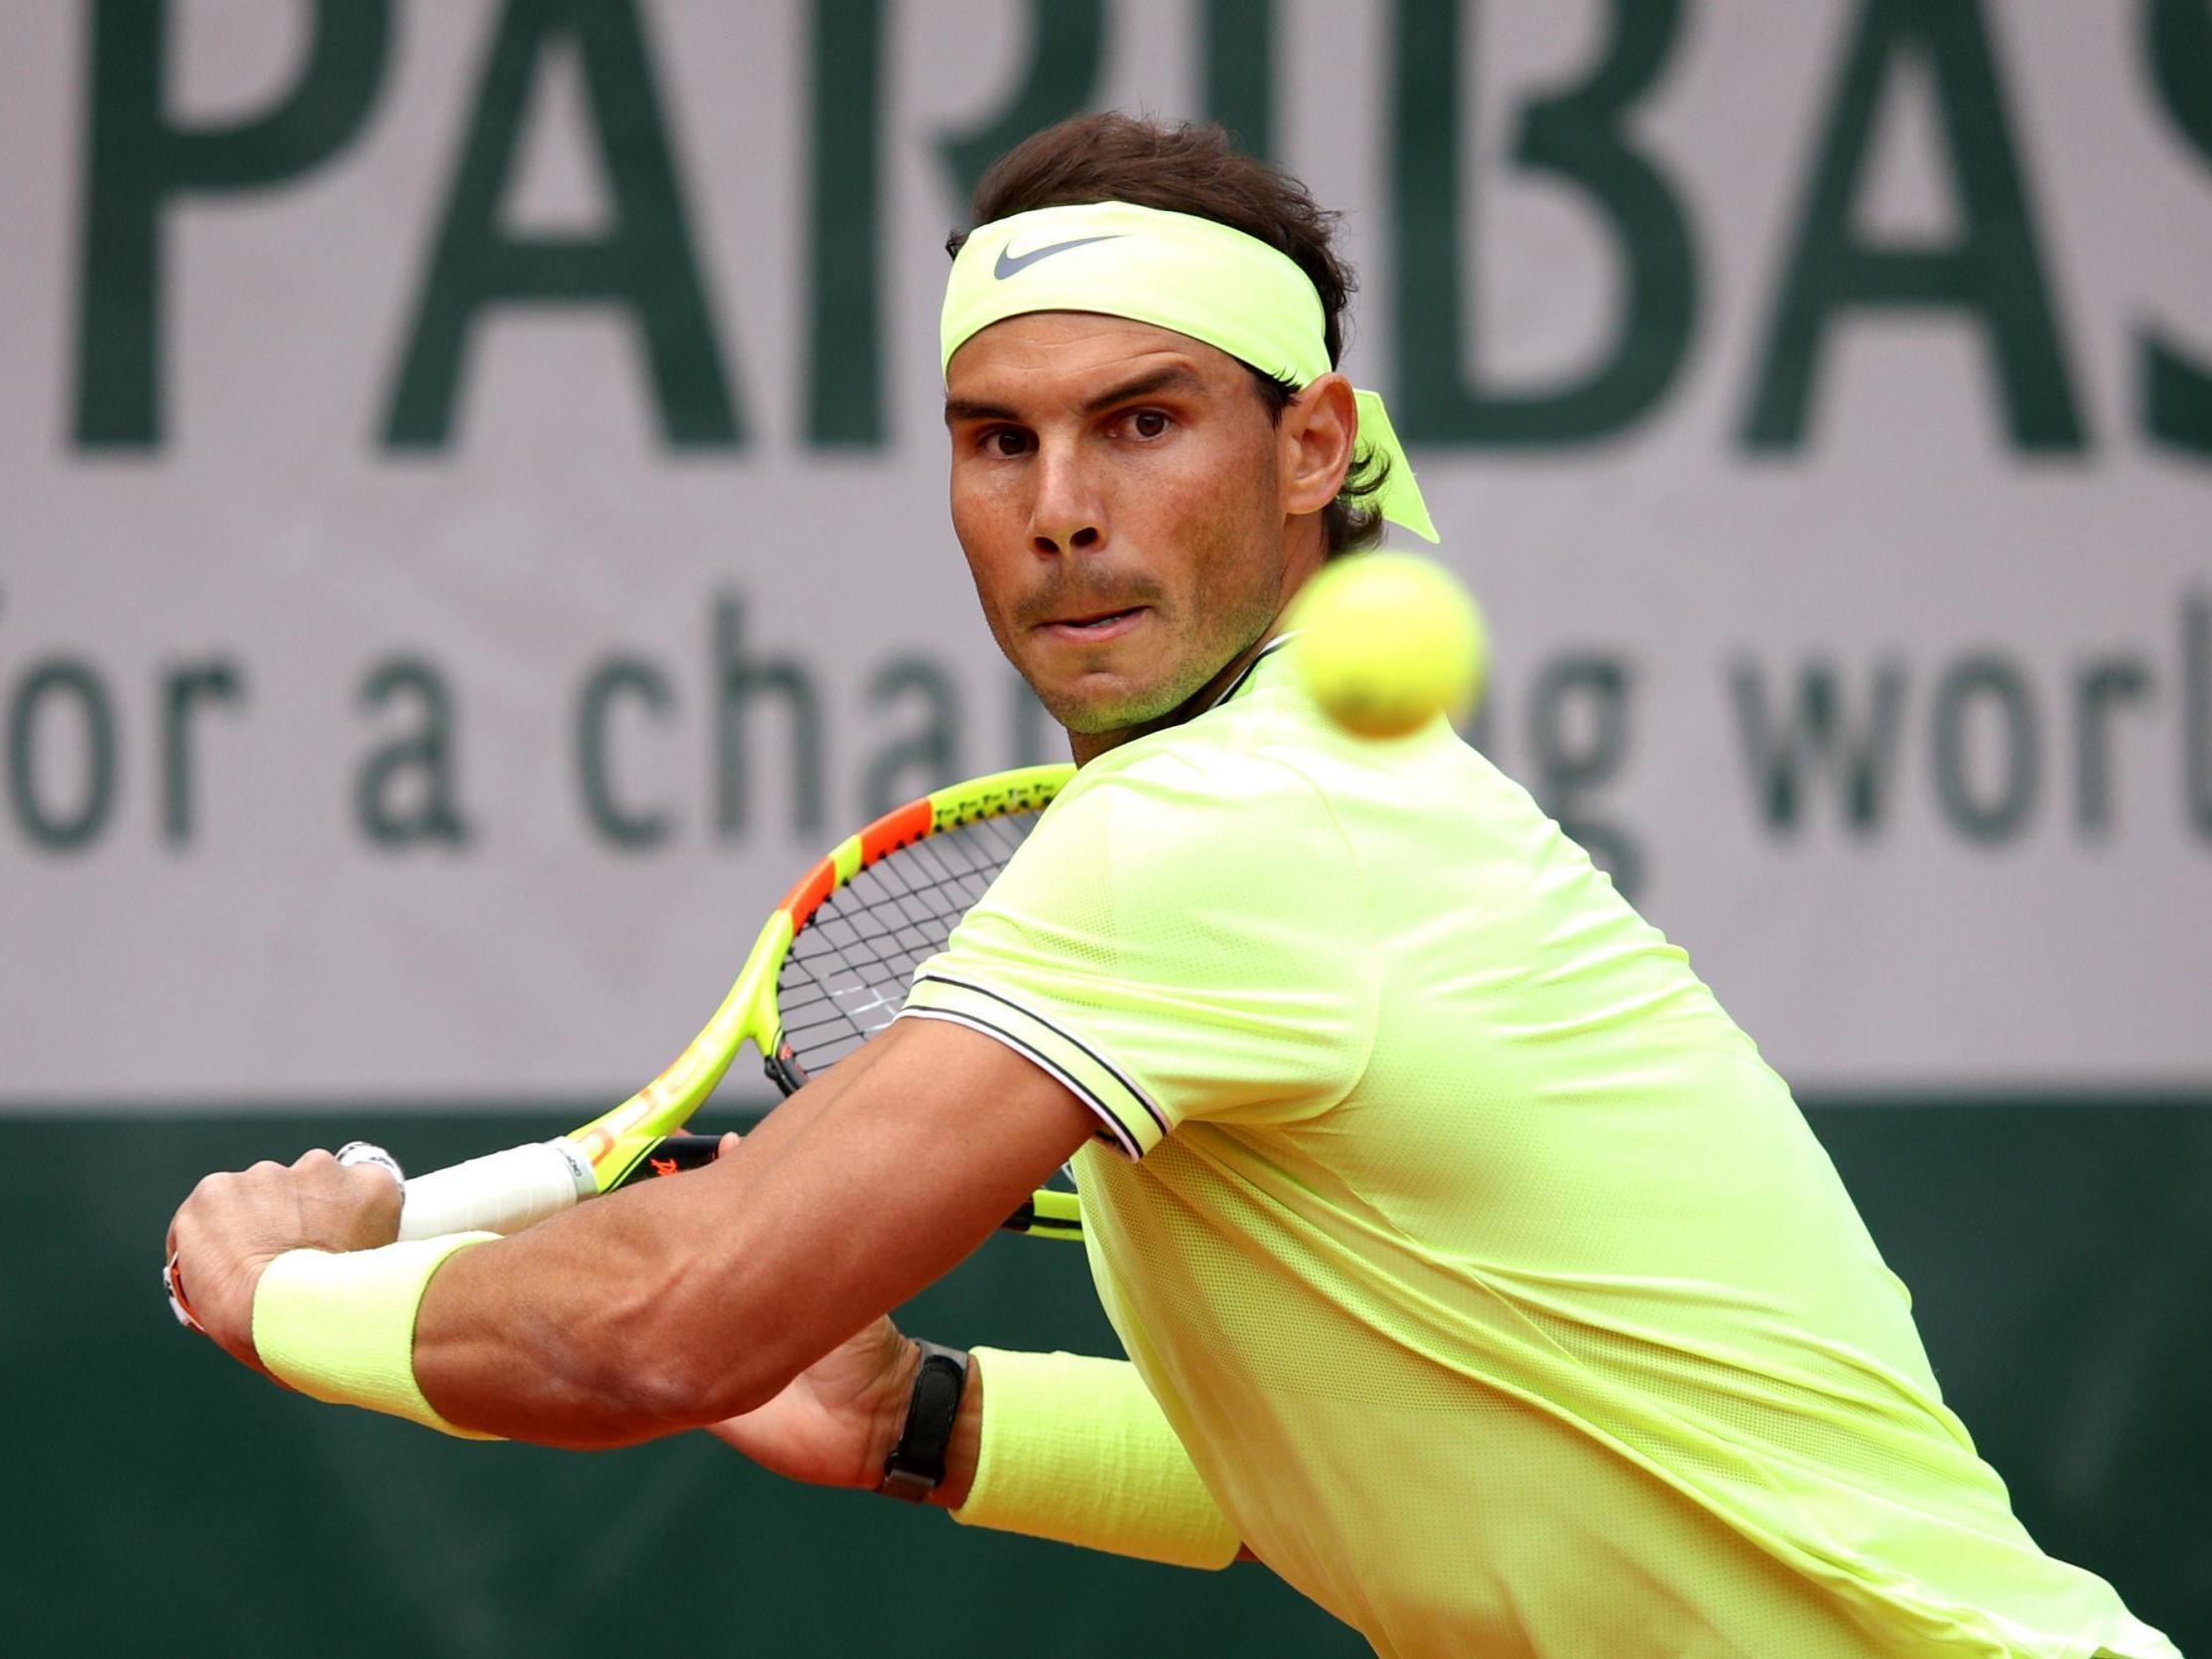 French Open results: Rafael Nadal extends Roland Garros record as